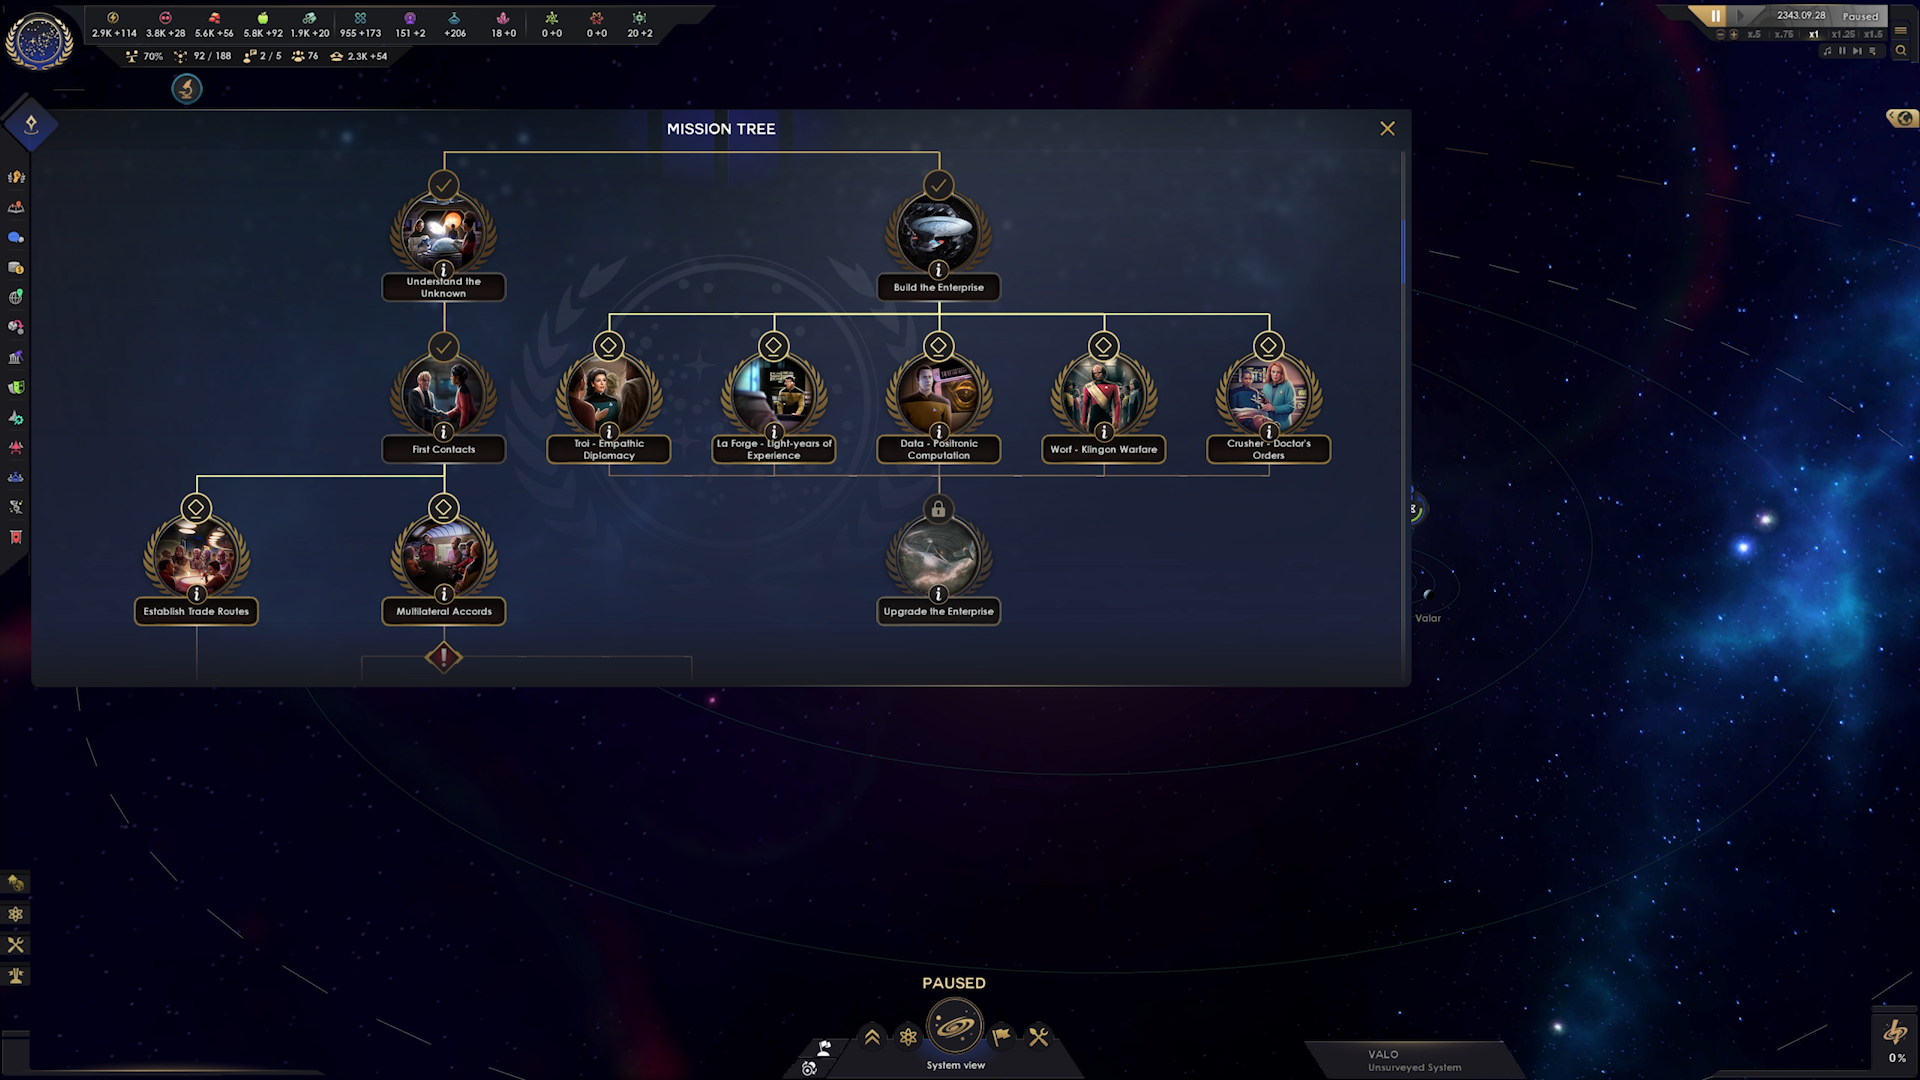 A screenshot of the Federation Mission Tree in Star Trek: Infinite. Several goals, like 